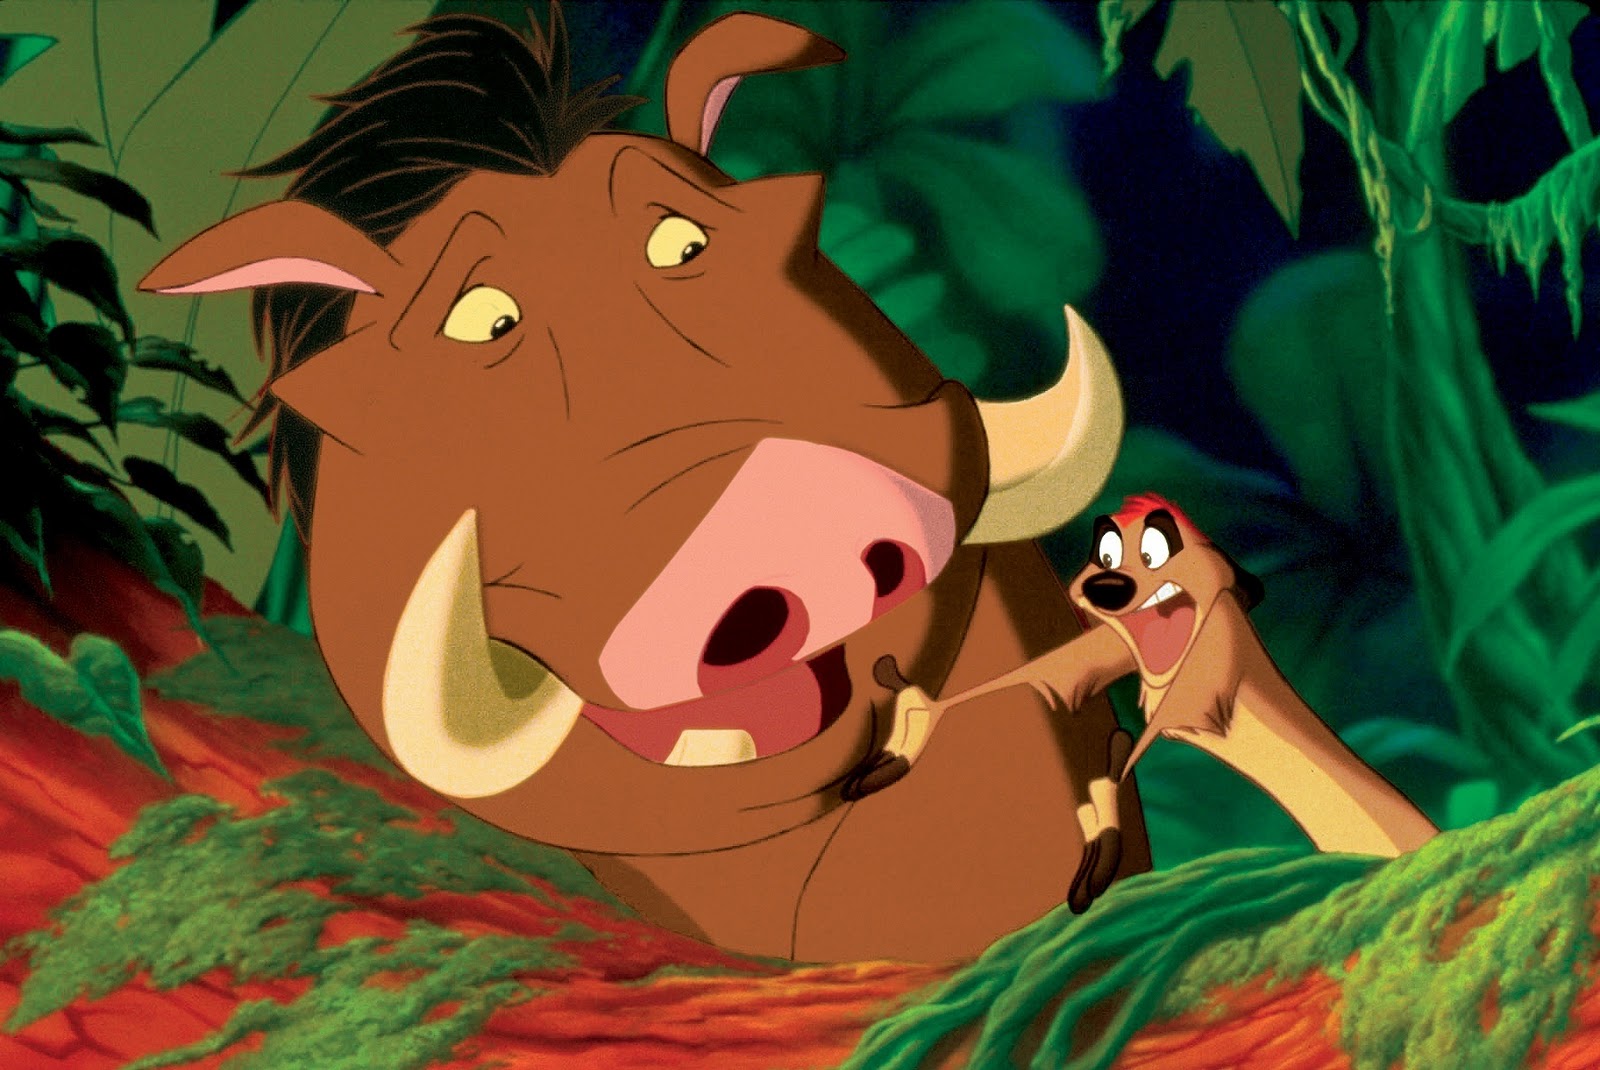 Quotes From Timon And Pumbaa The Lion King.